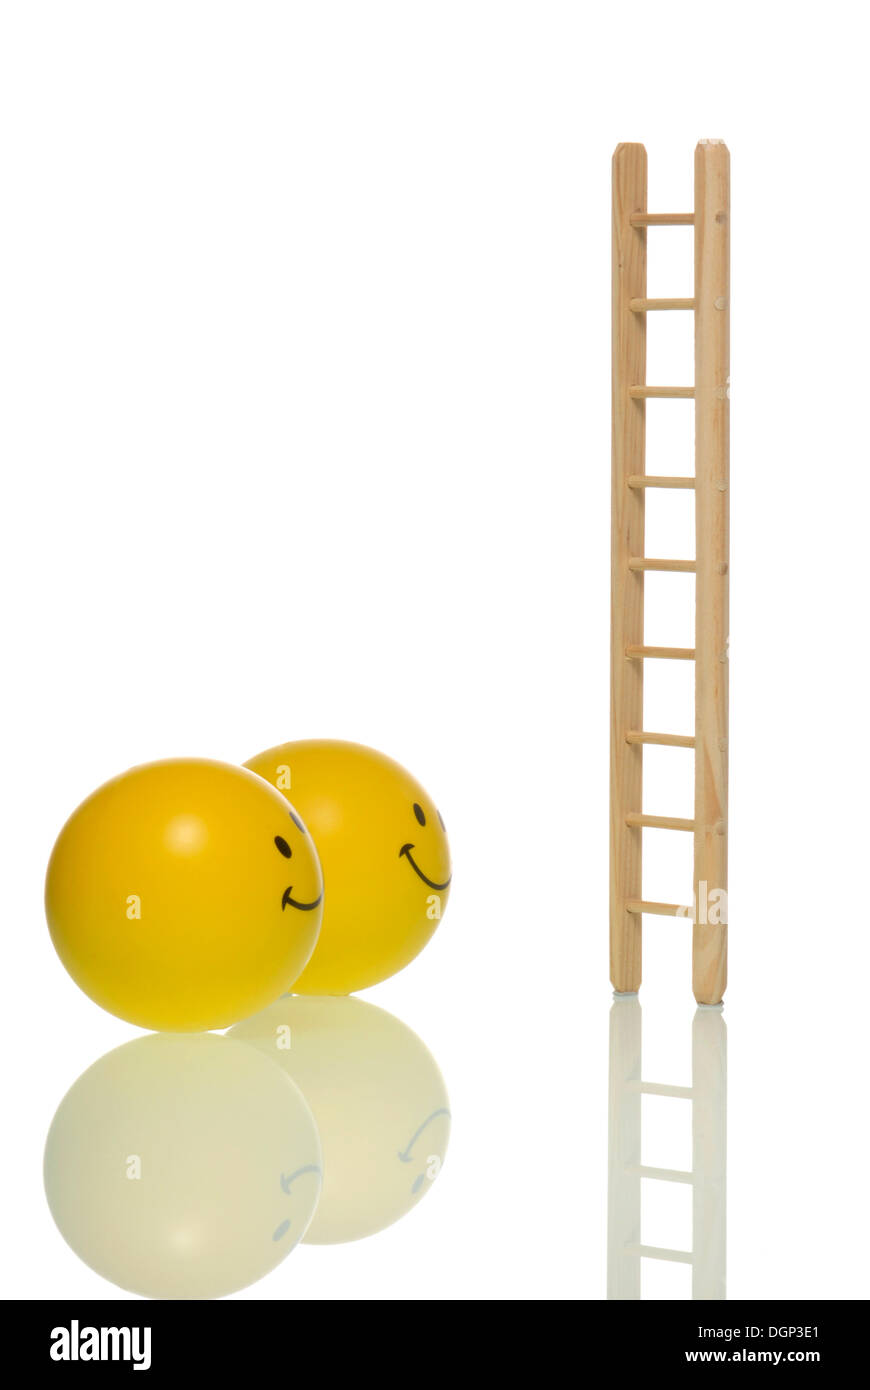 Two smileys in front of a ladder, symbolic image for the ladder of success Stock Photo